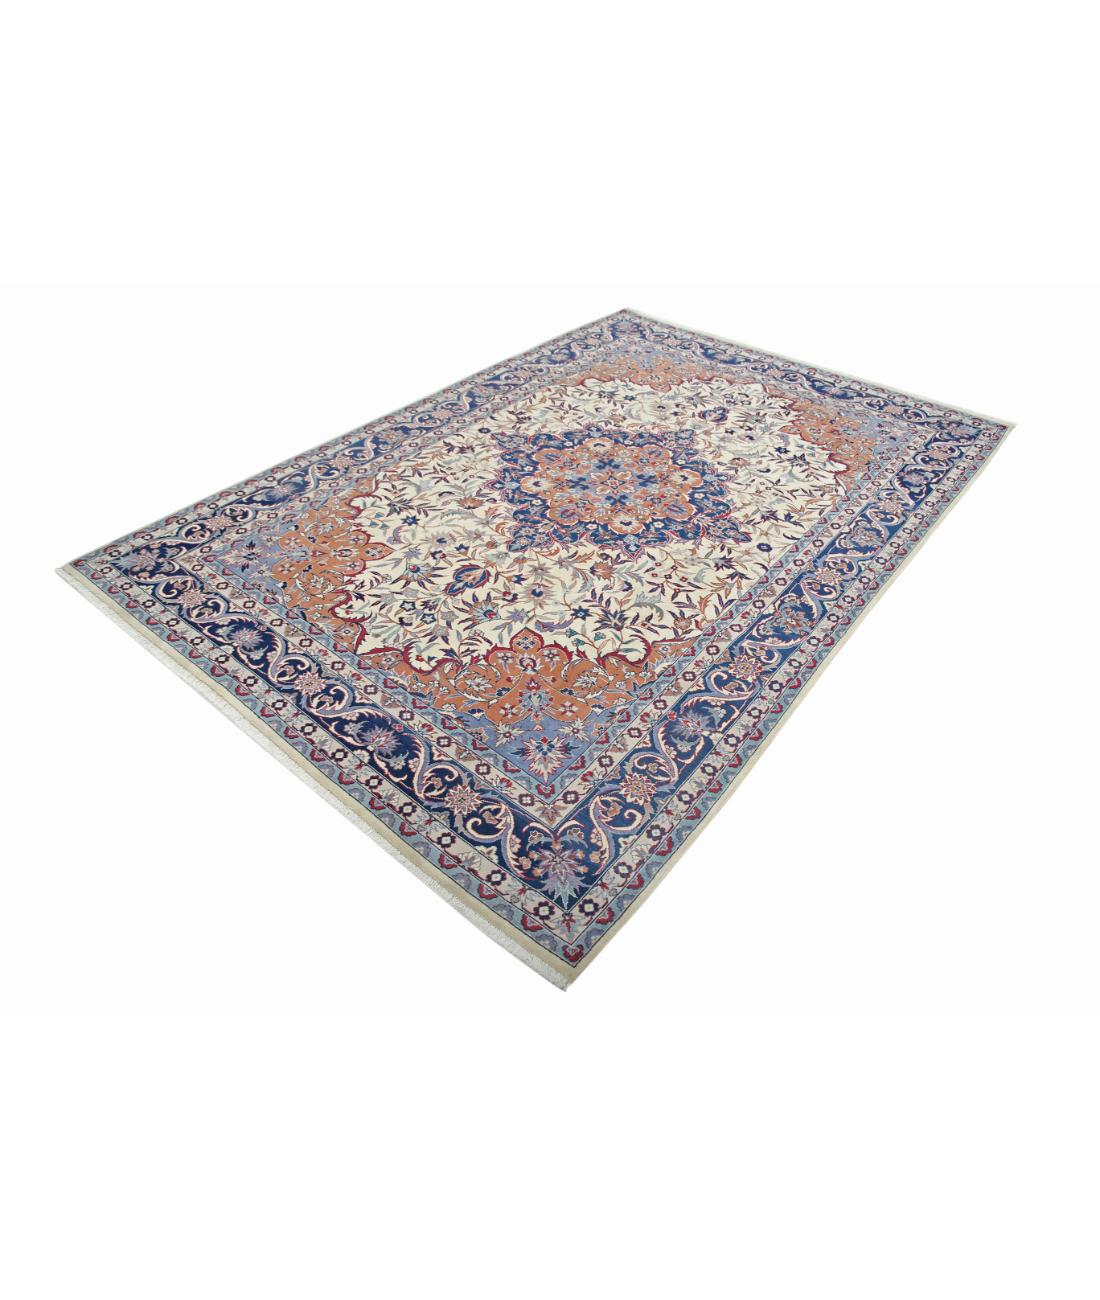 Heritage 6' 0" X 8' 11" Hand-Knotted Wool Rug 6' 0" X 8' 11" (183 X 272) / Ivory / Blue